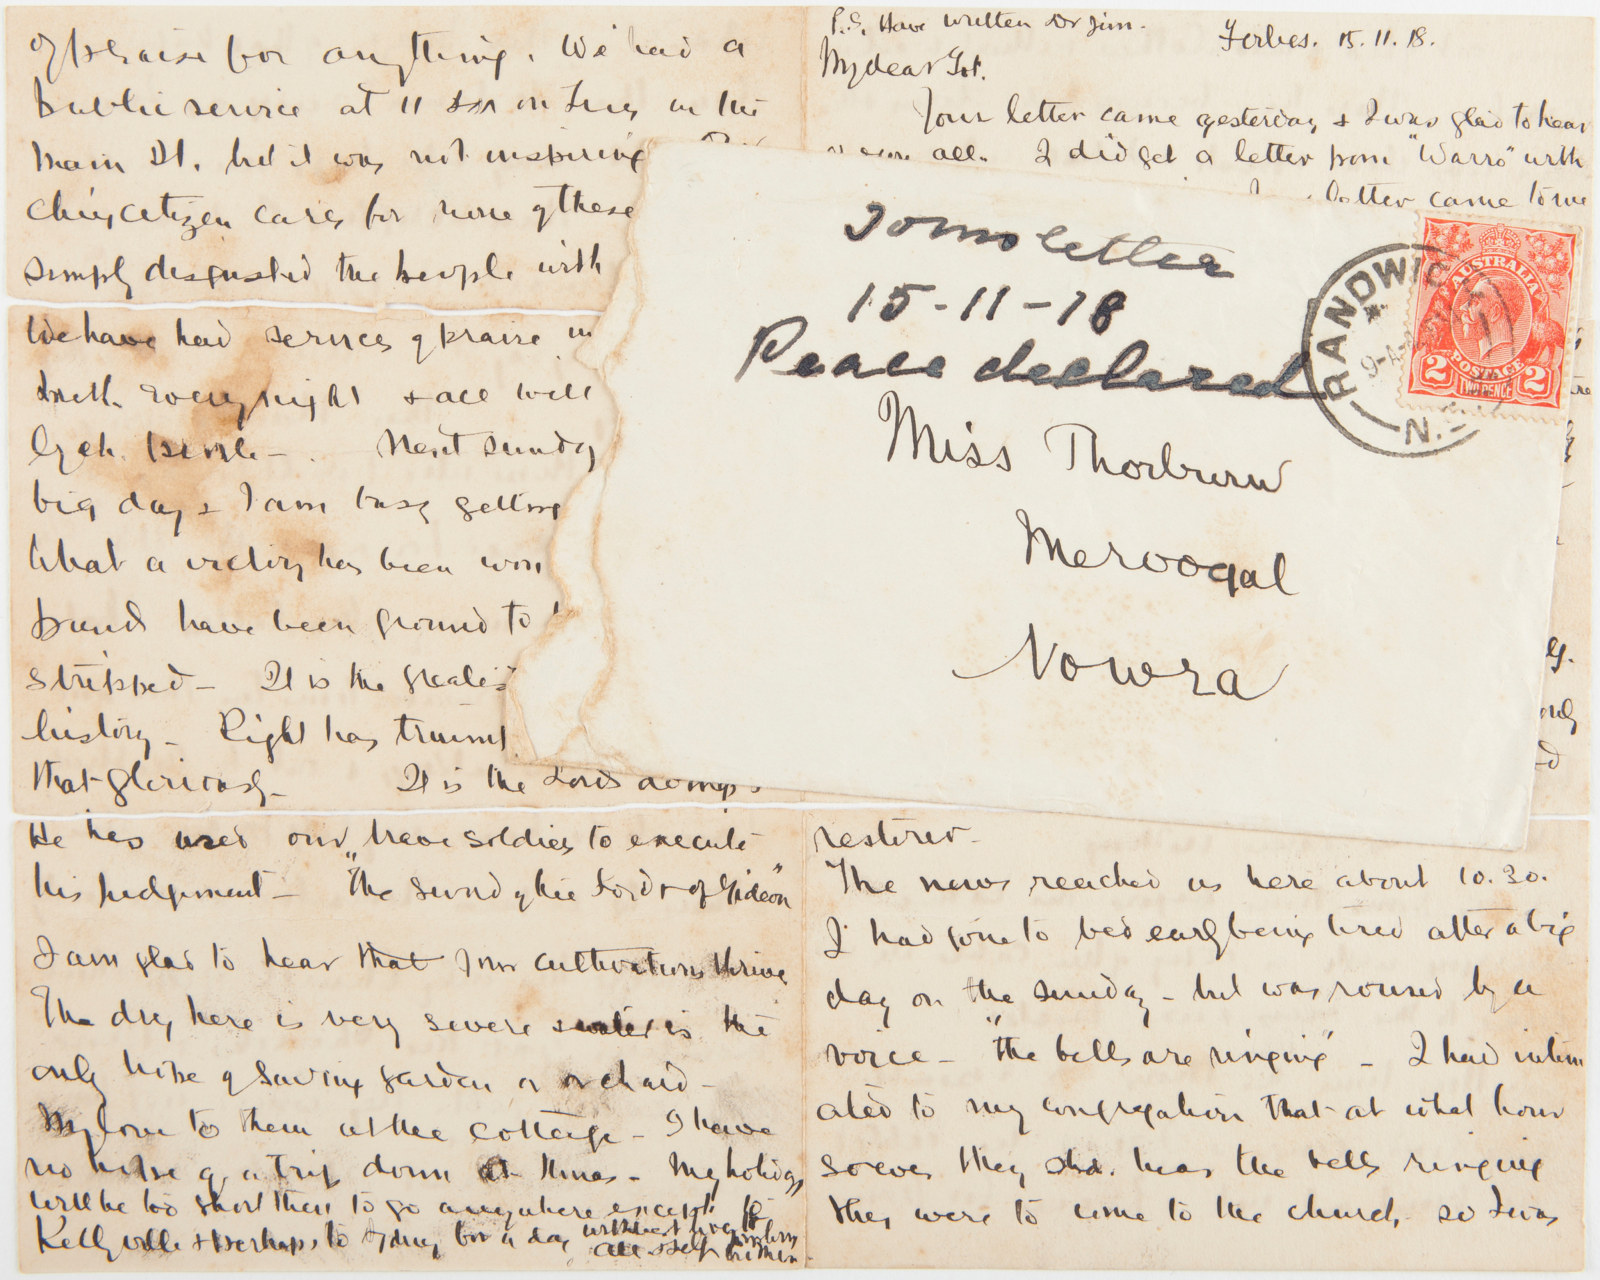 Tom Thorburn’s letter from Forbes on 15 November 1918 to his sister Tot Thorburn at Meroogal, Nowra 